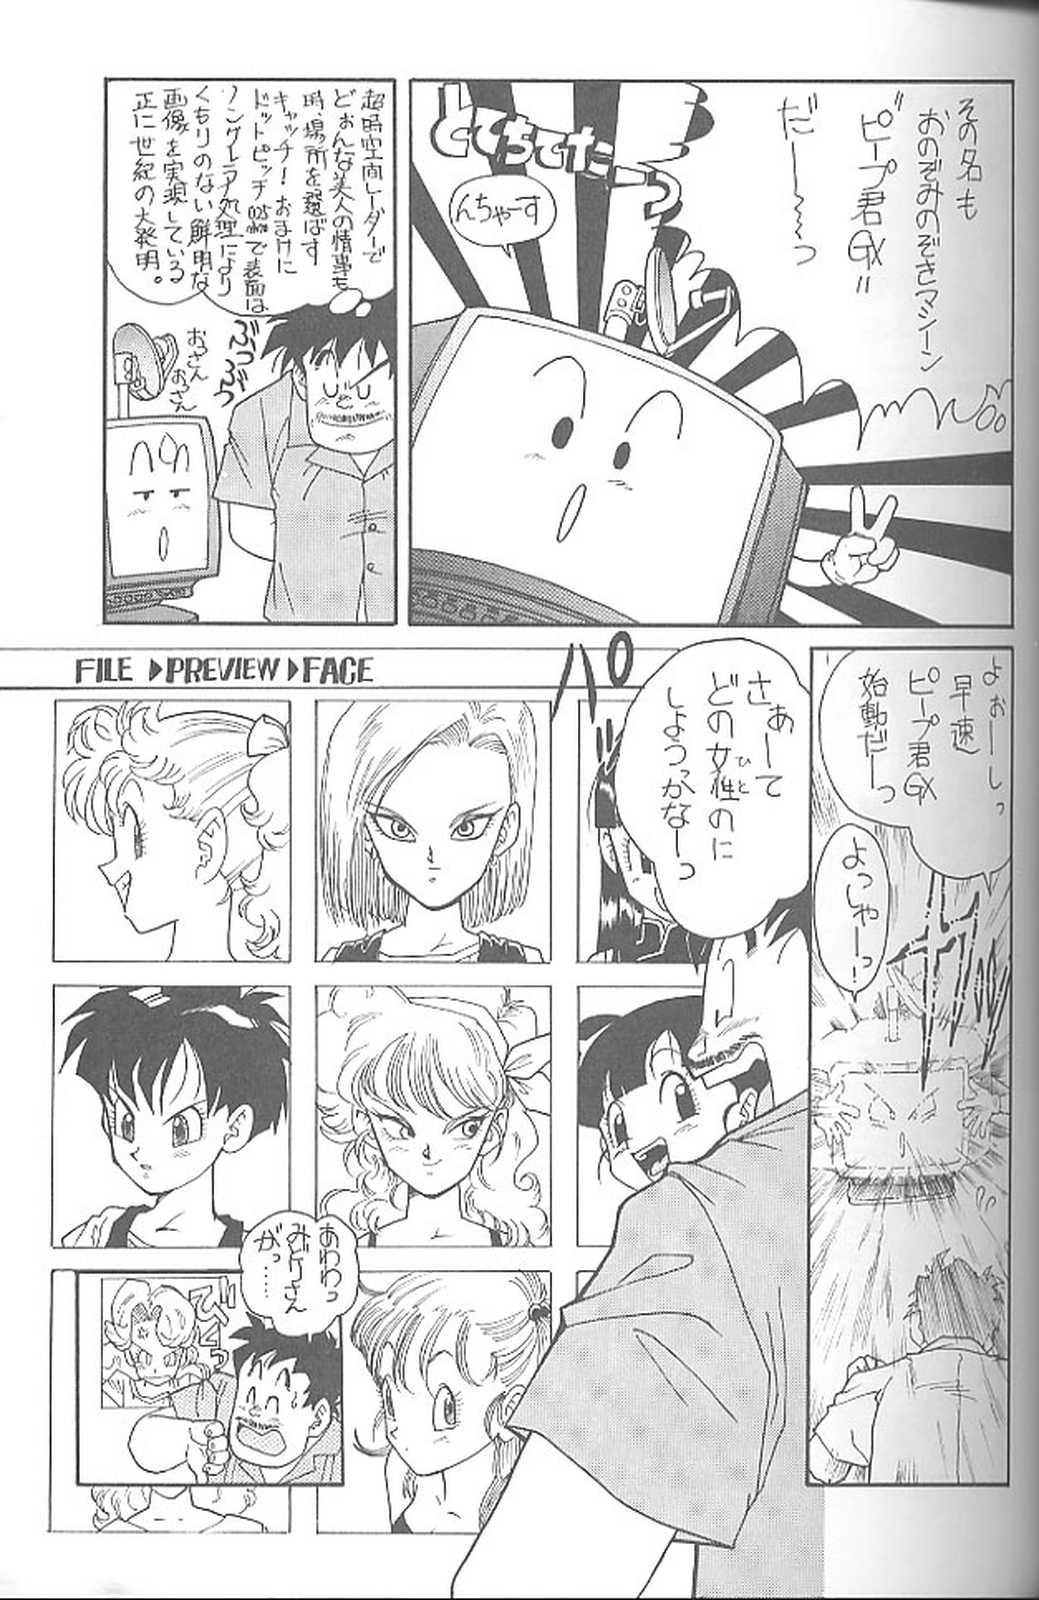 Banging Haraharatokei vol.4 - Dragon ball z Slayers Dirty pair Ghost sweeper mikami World masterpiece theater Dr. slump Tico of the seven seas Girlfriends - Page 6